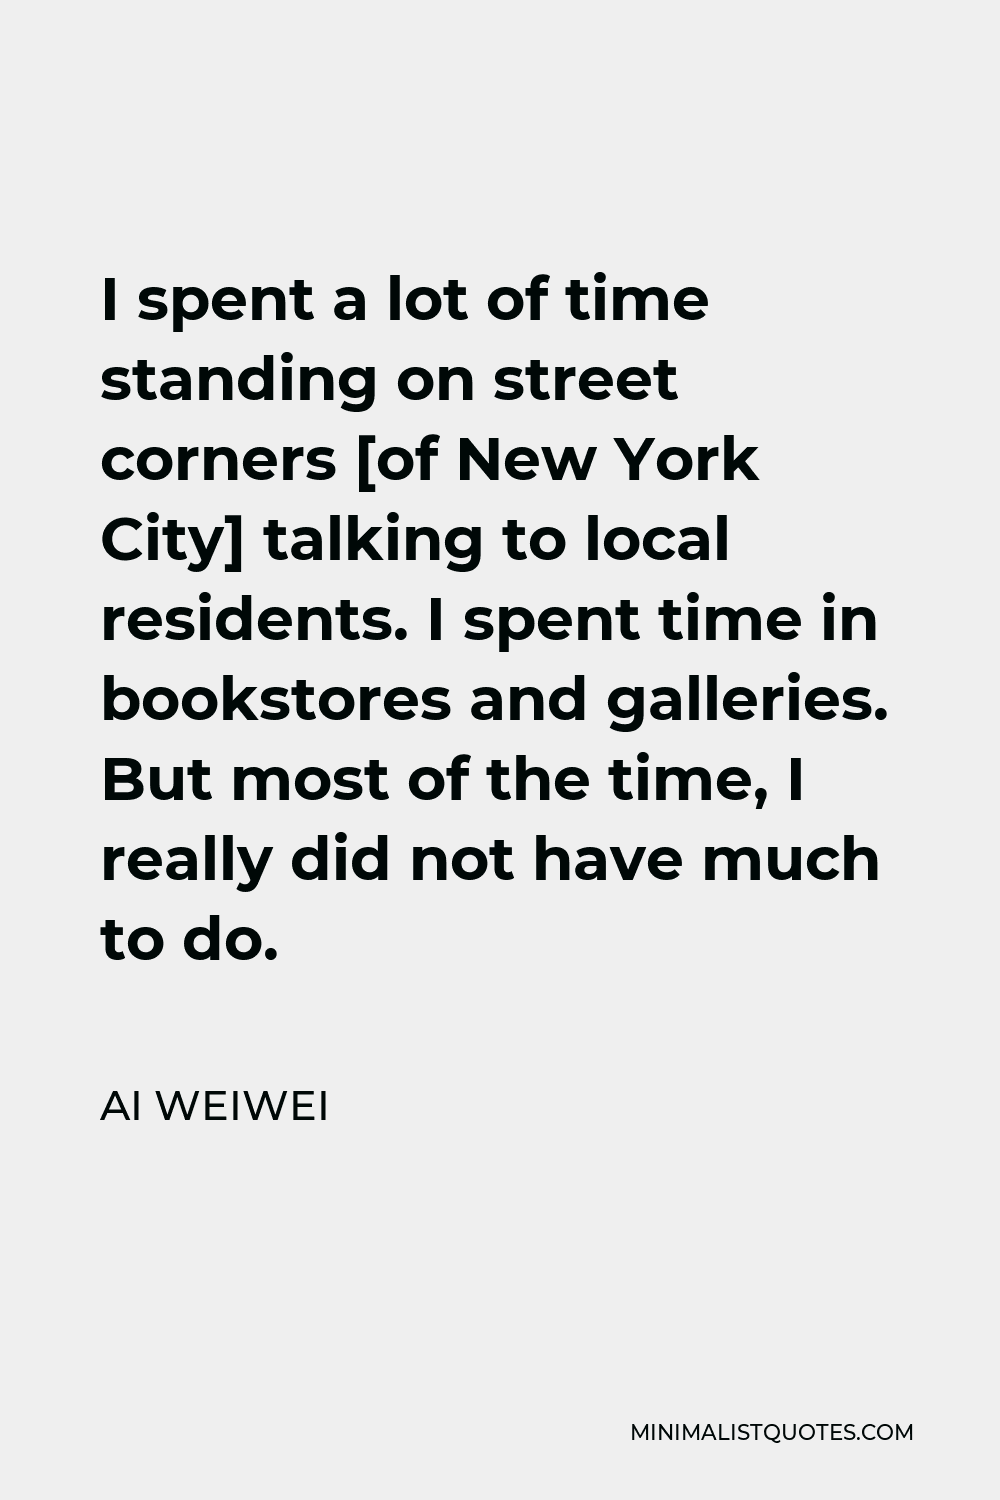 Ai Weiwei Quote - I spent a lot of time standing on street corners [of New York City] talking to local residents. I spent time in bookstores and galleries. But most of the time, I really did not have much to do.